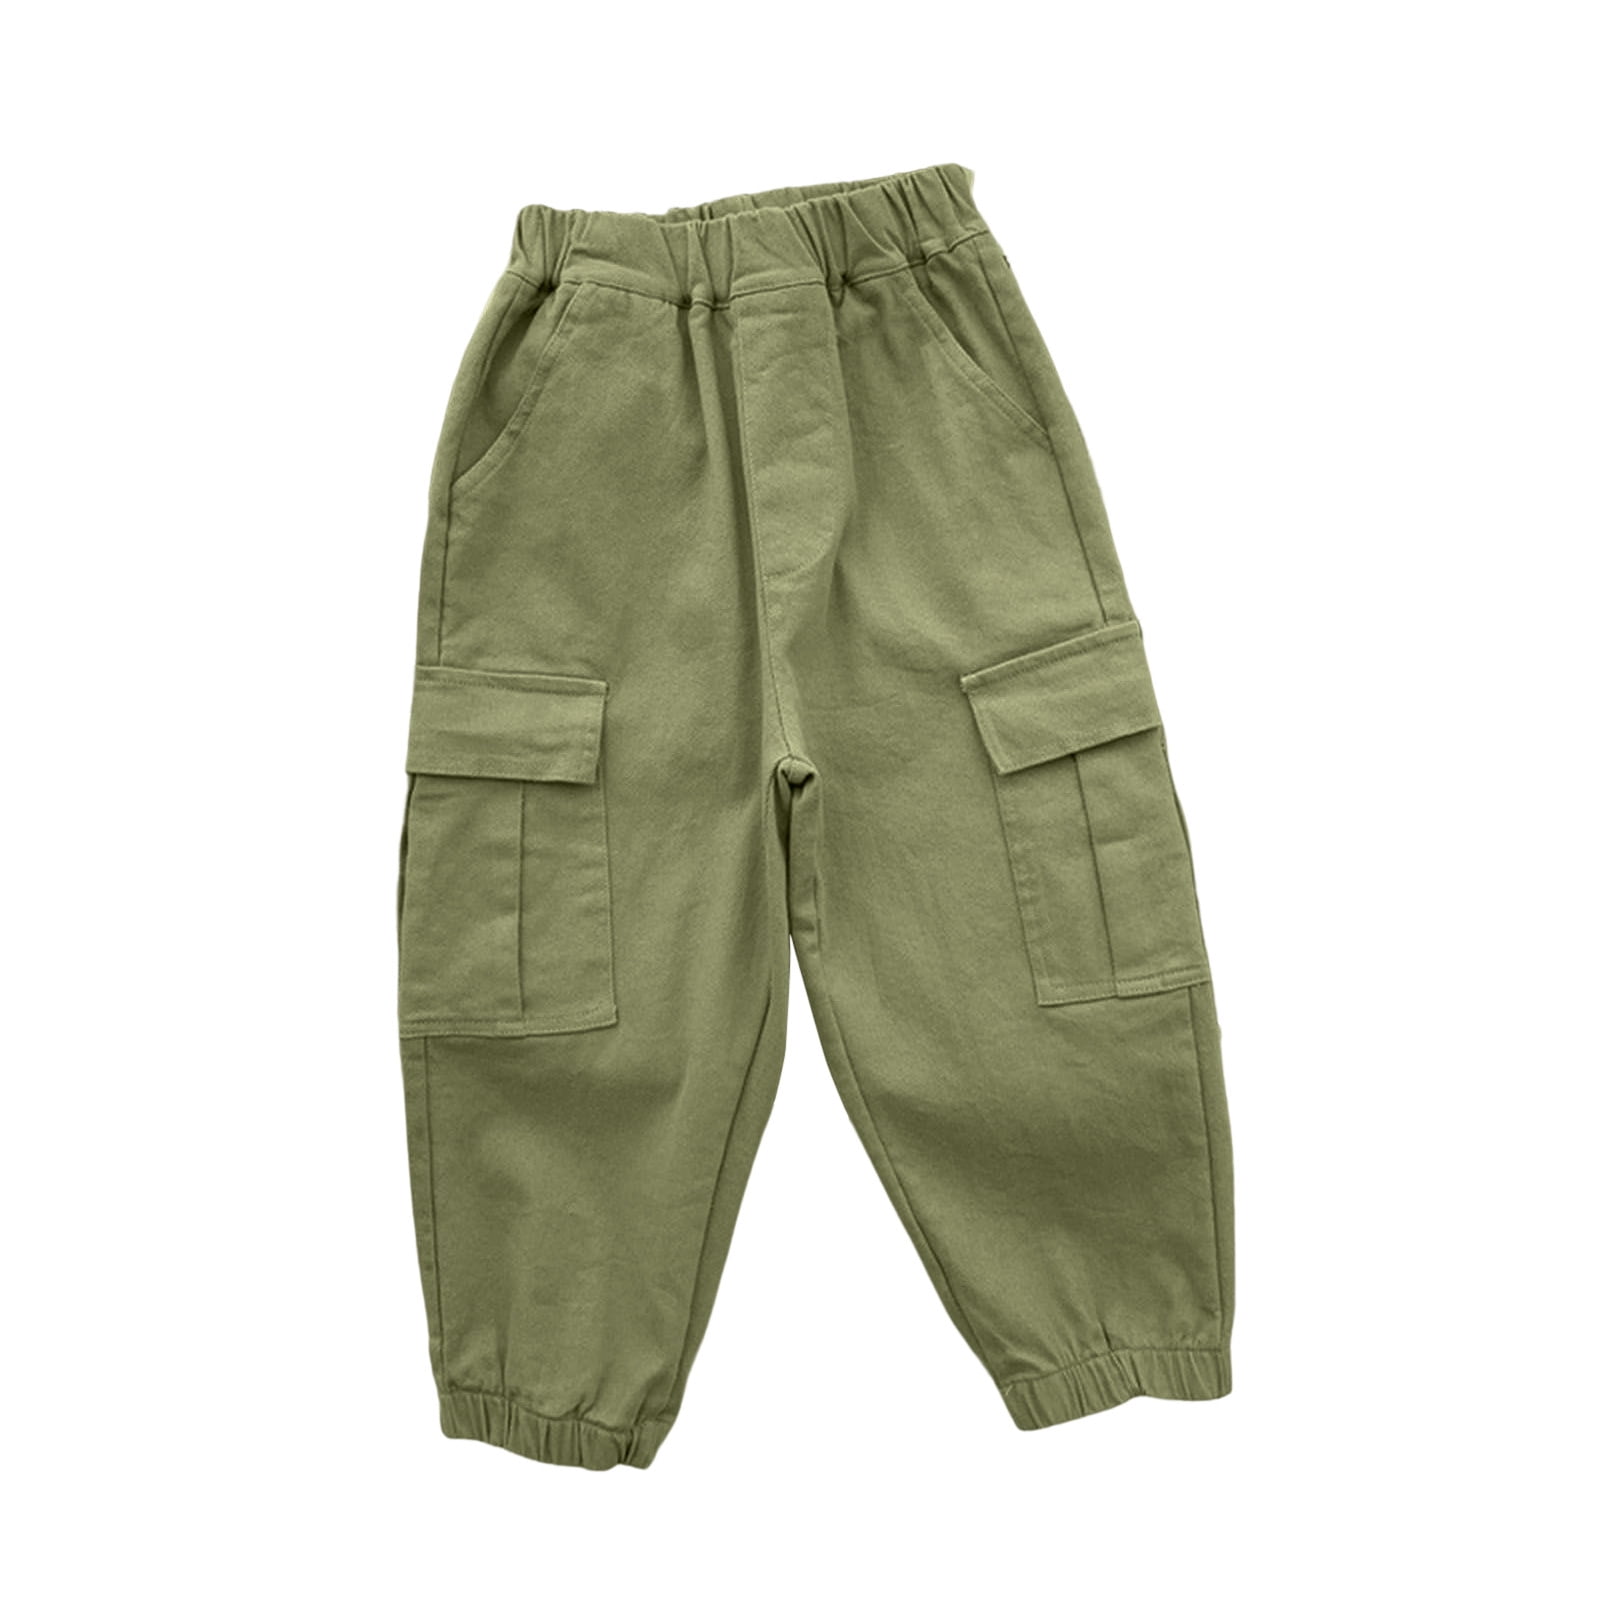 KaLI_store Girls Cargo Pants Kids Pants Wide Leg Pant with Pockets Loose  Stretchy Sweatpants Pants for Girl Khaki,5-6 Years 